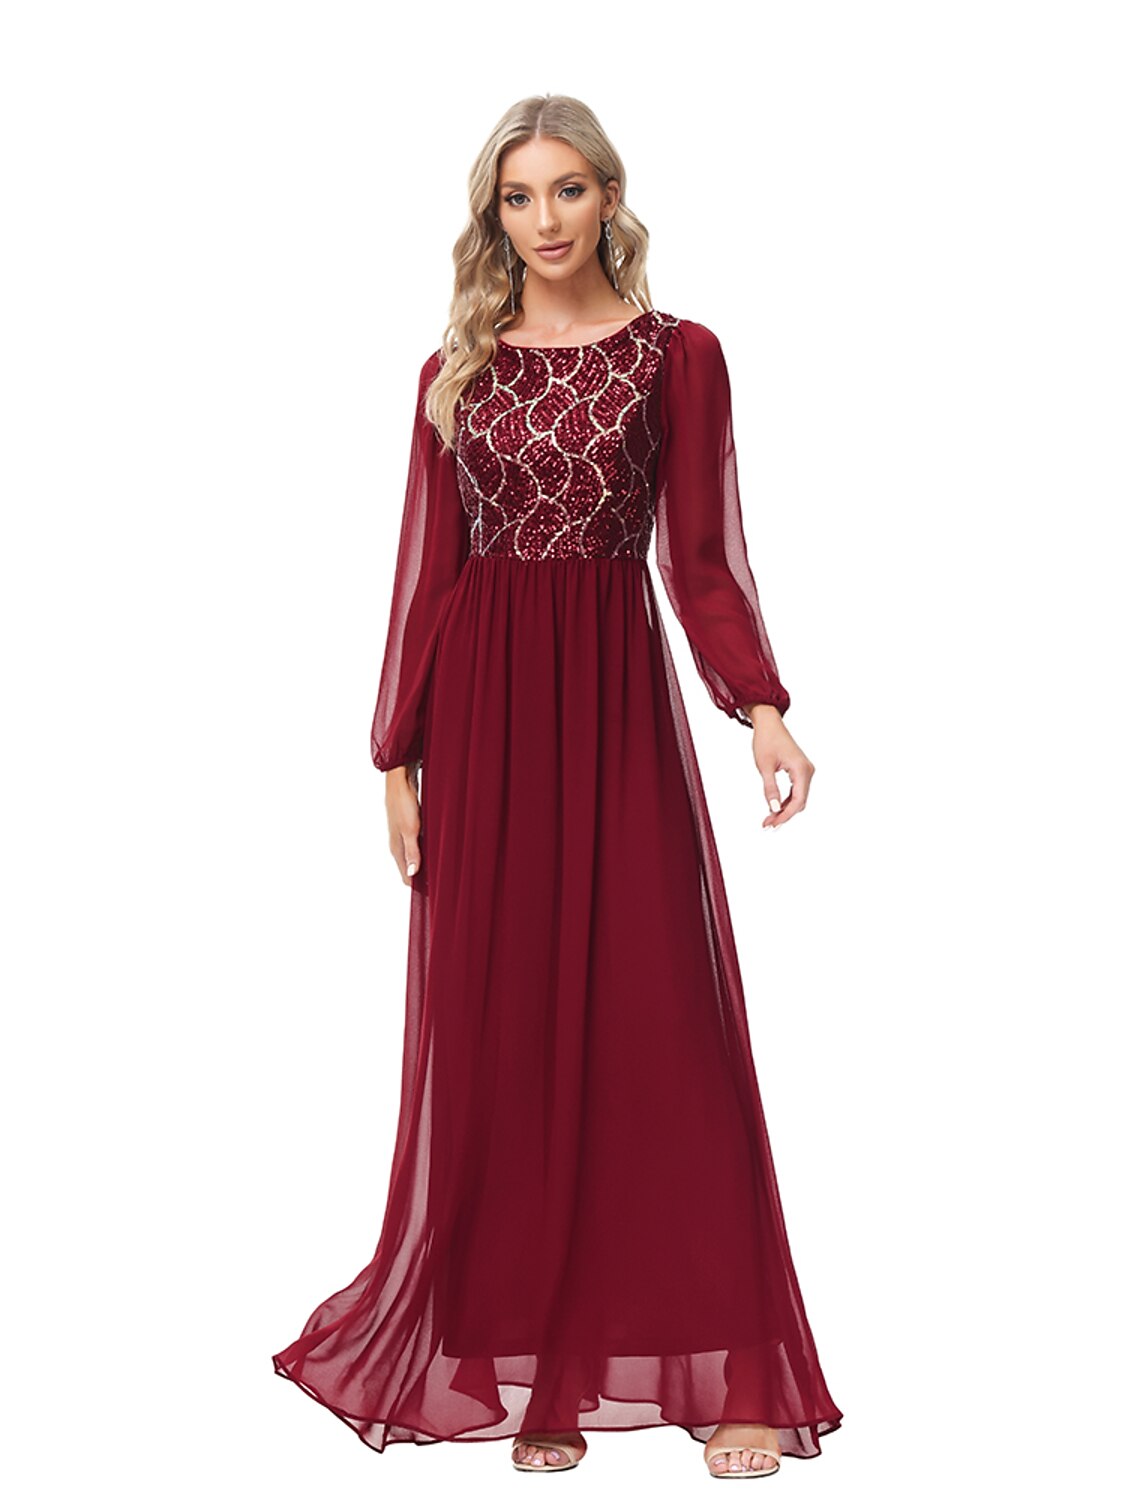 A-Line Evening Gown Empire Dress Party Wear Wedding Guest Floor Length Long Sleeve Jewel Neck Chiffon V Back with Sequin Splicing